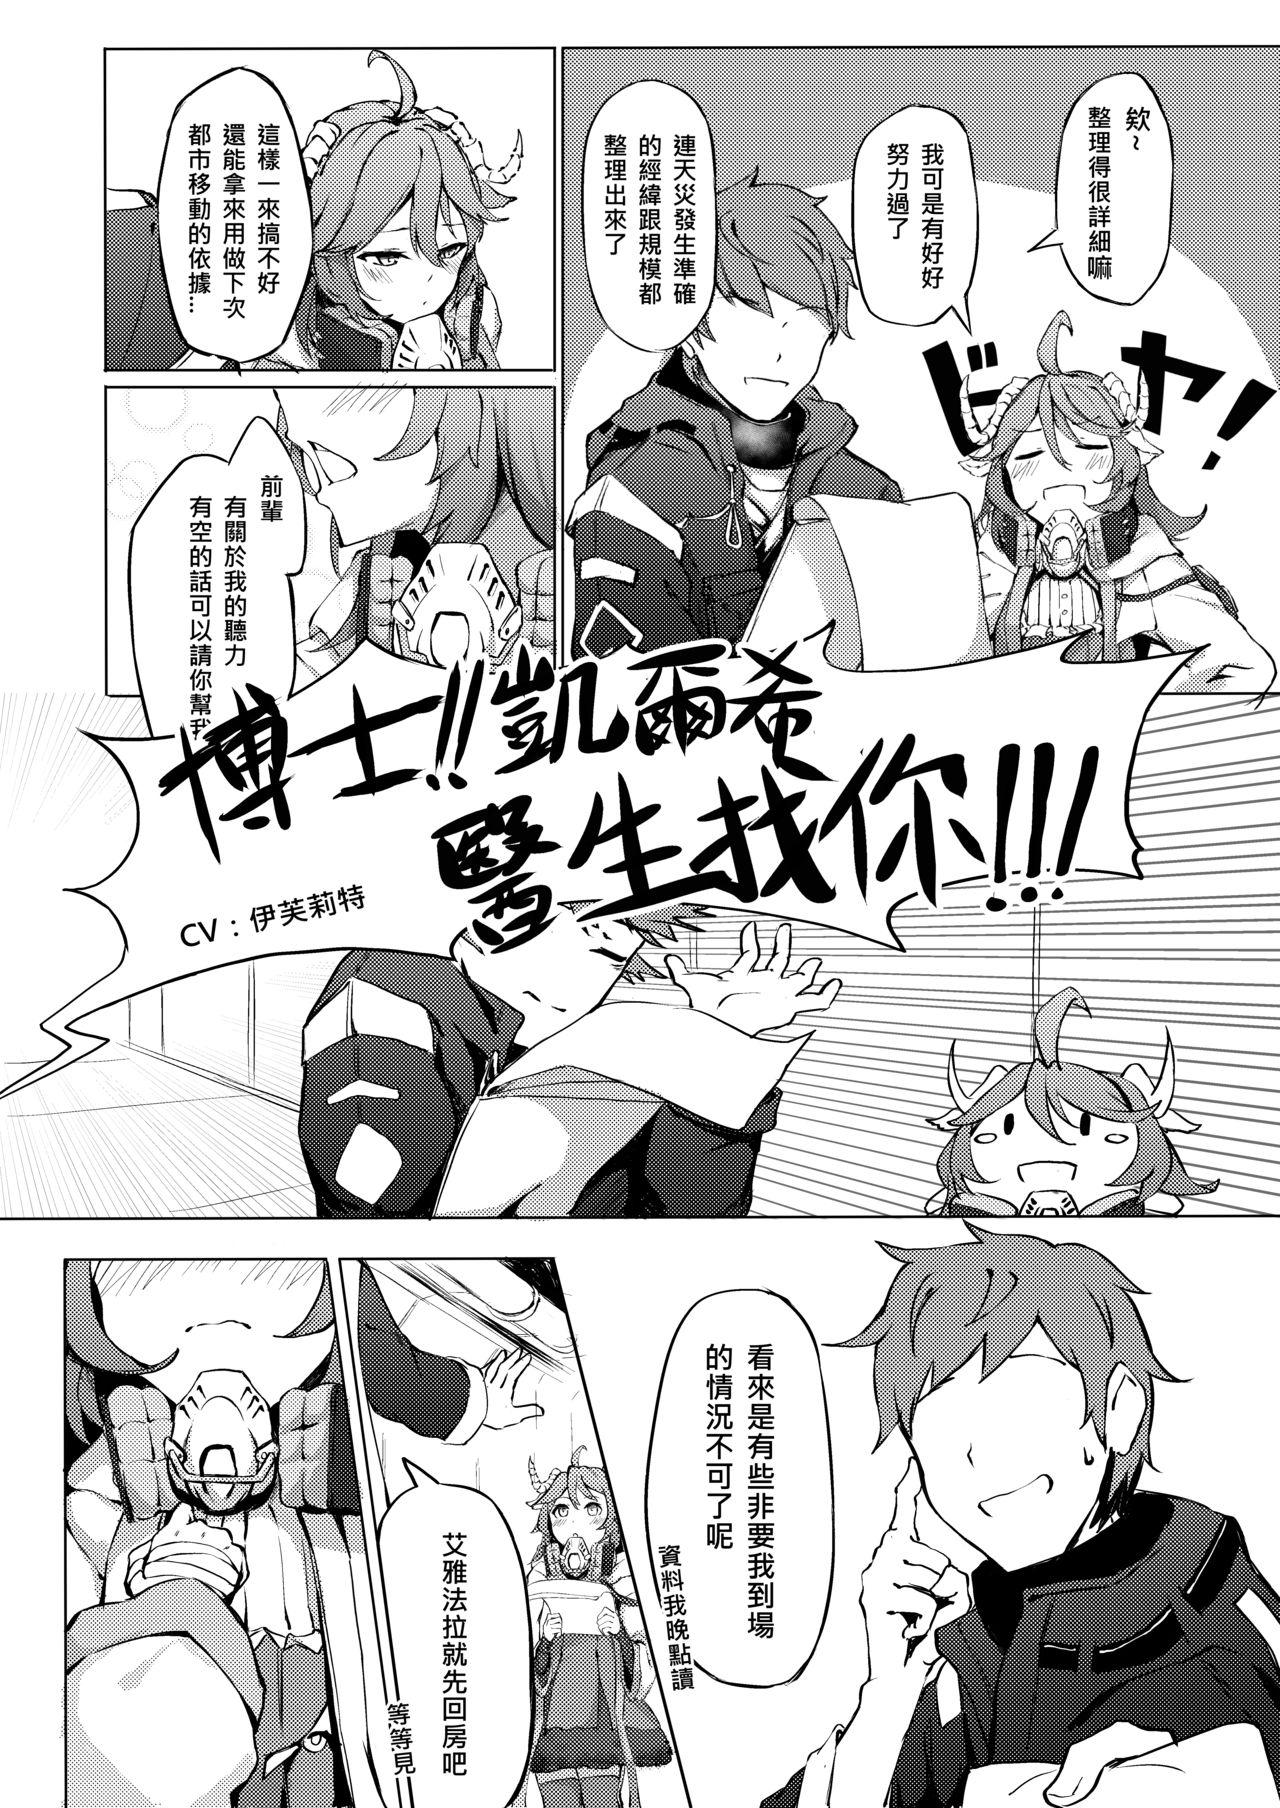 Sucks 不存在的聲音 | The Nonexistence Voice - Arknights Banho - Page 6